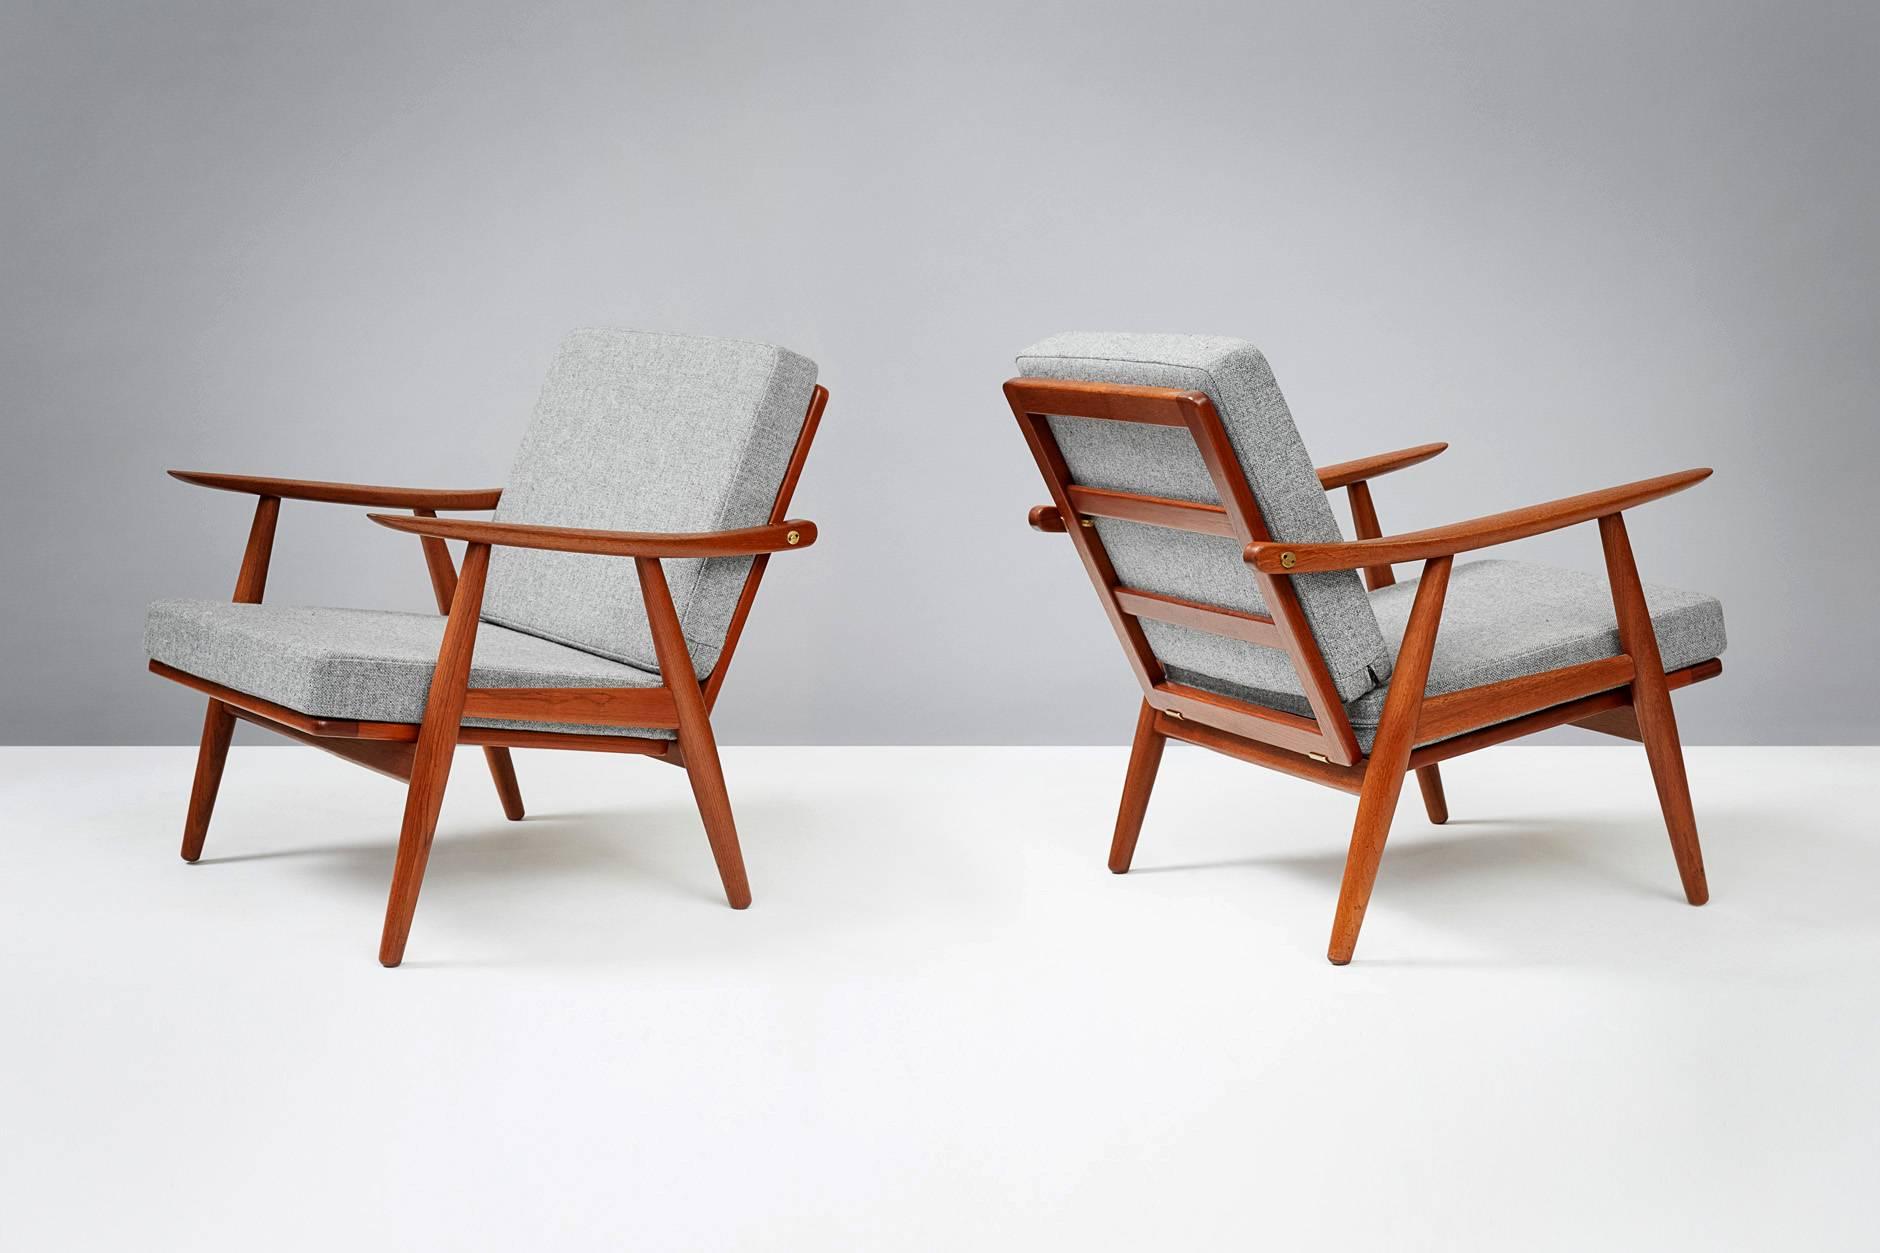 Hans Wegner

GE-270 chair, 1956

Produced by Getama, Gedsted, Denmark. Teak frame with exposed brass fittings. New cushions covered in Kvadrat Hallingdal #130 wool fabric.